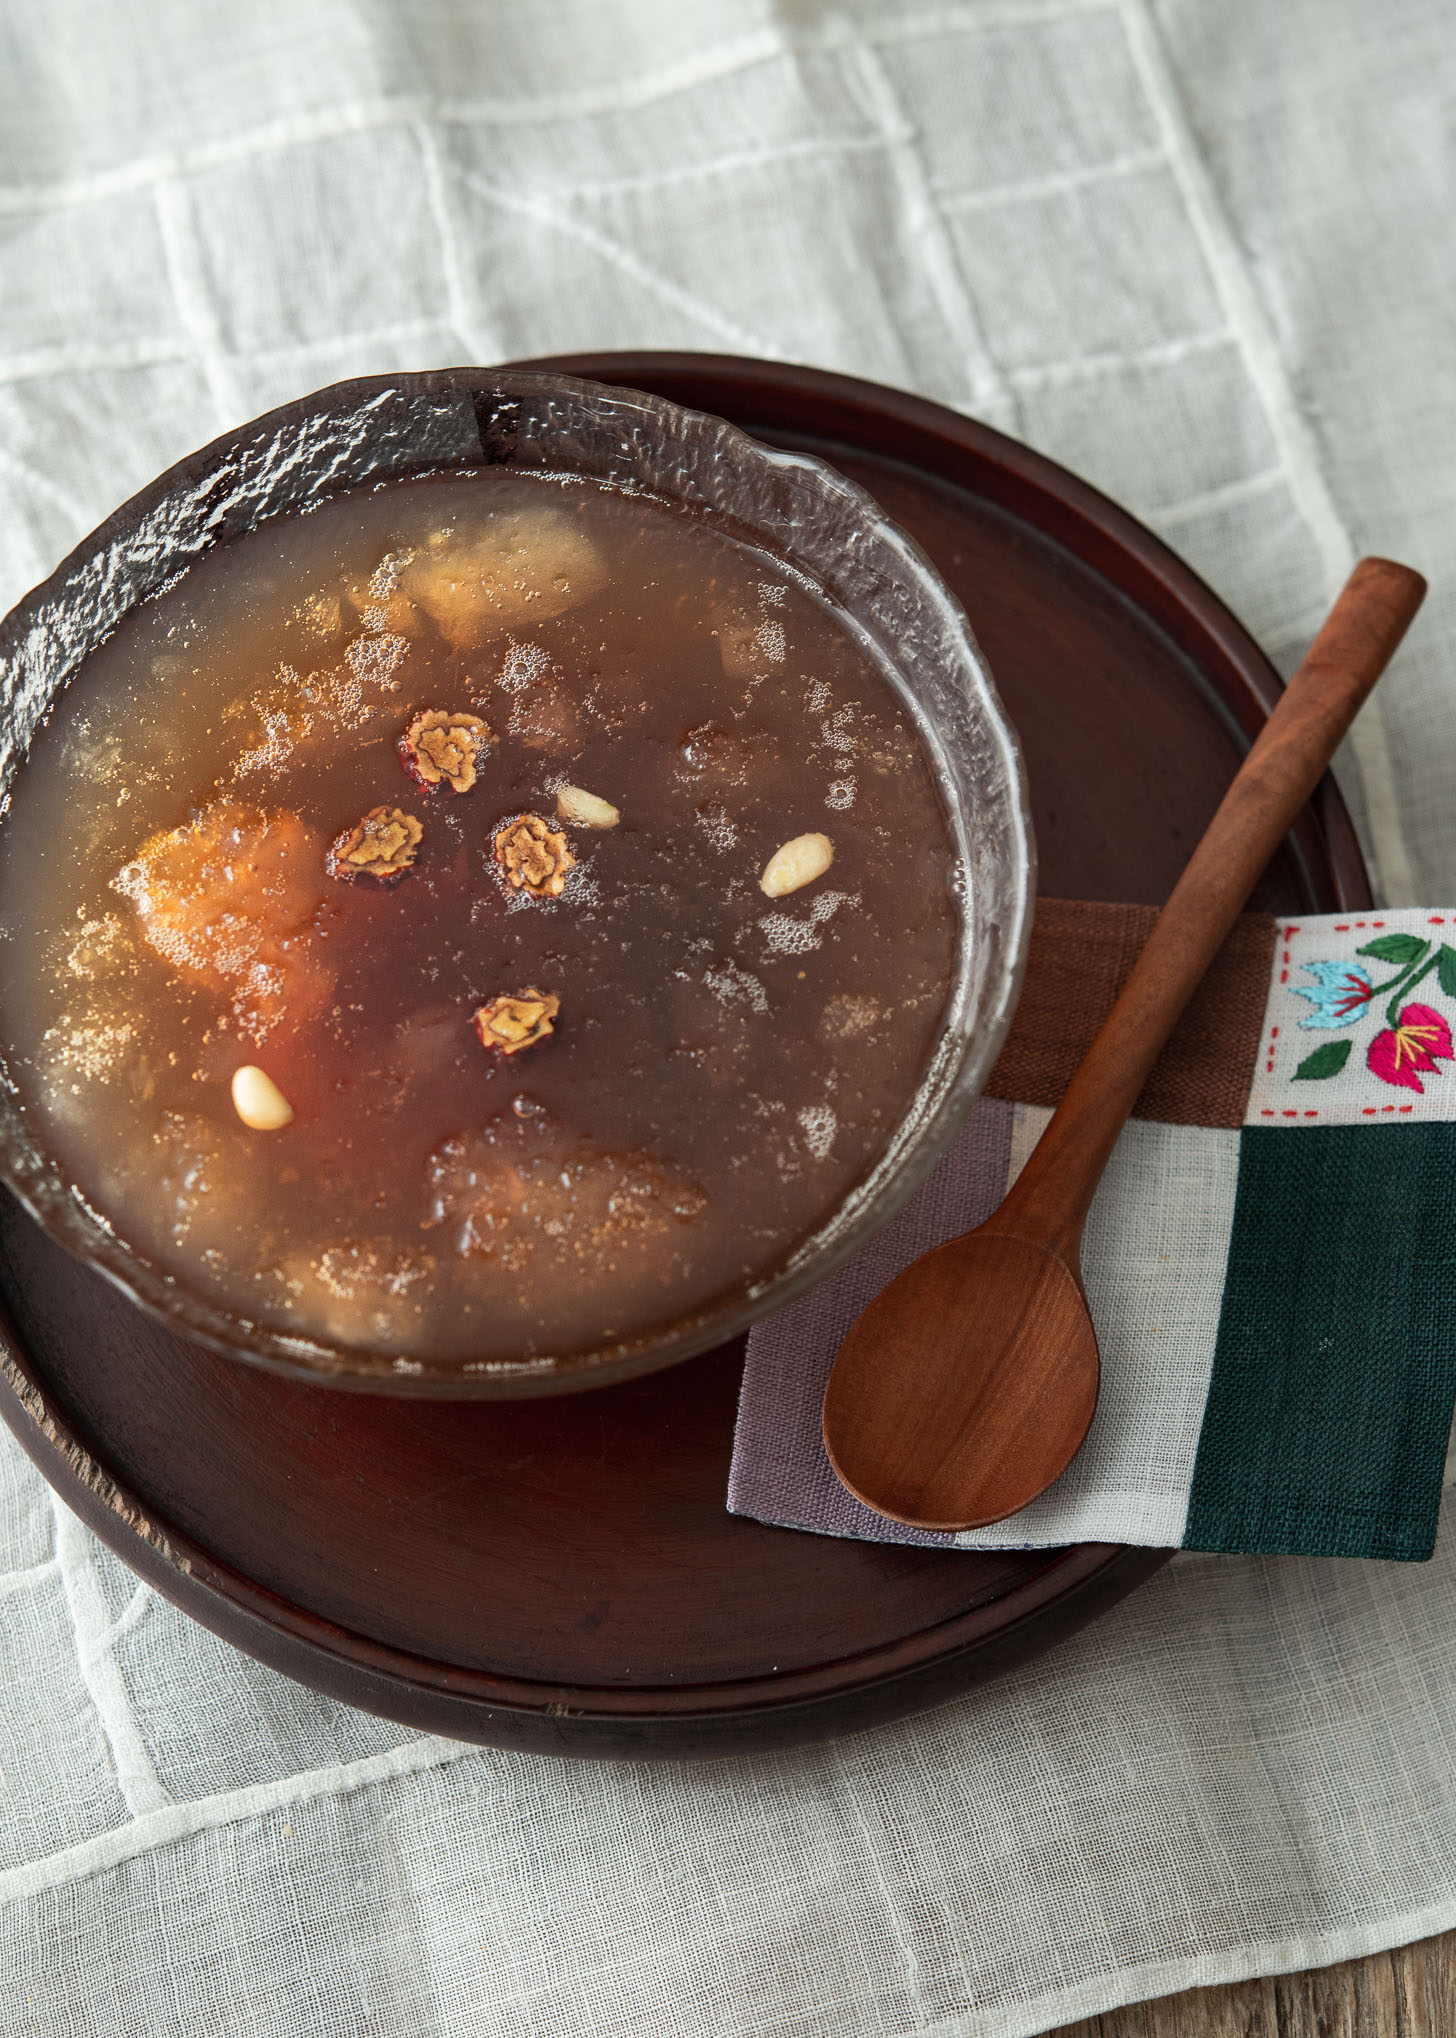 Cold Korean cinnamon punch (sujeonggwa) is served in a glass bowl with a spoon on the side.